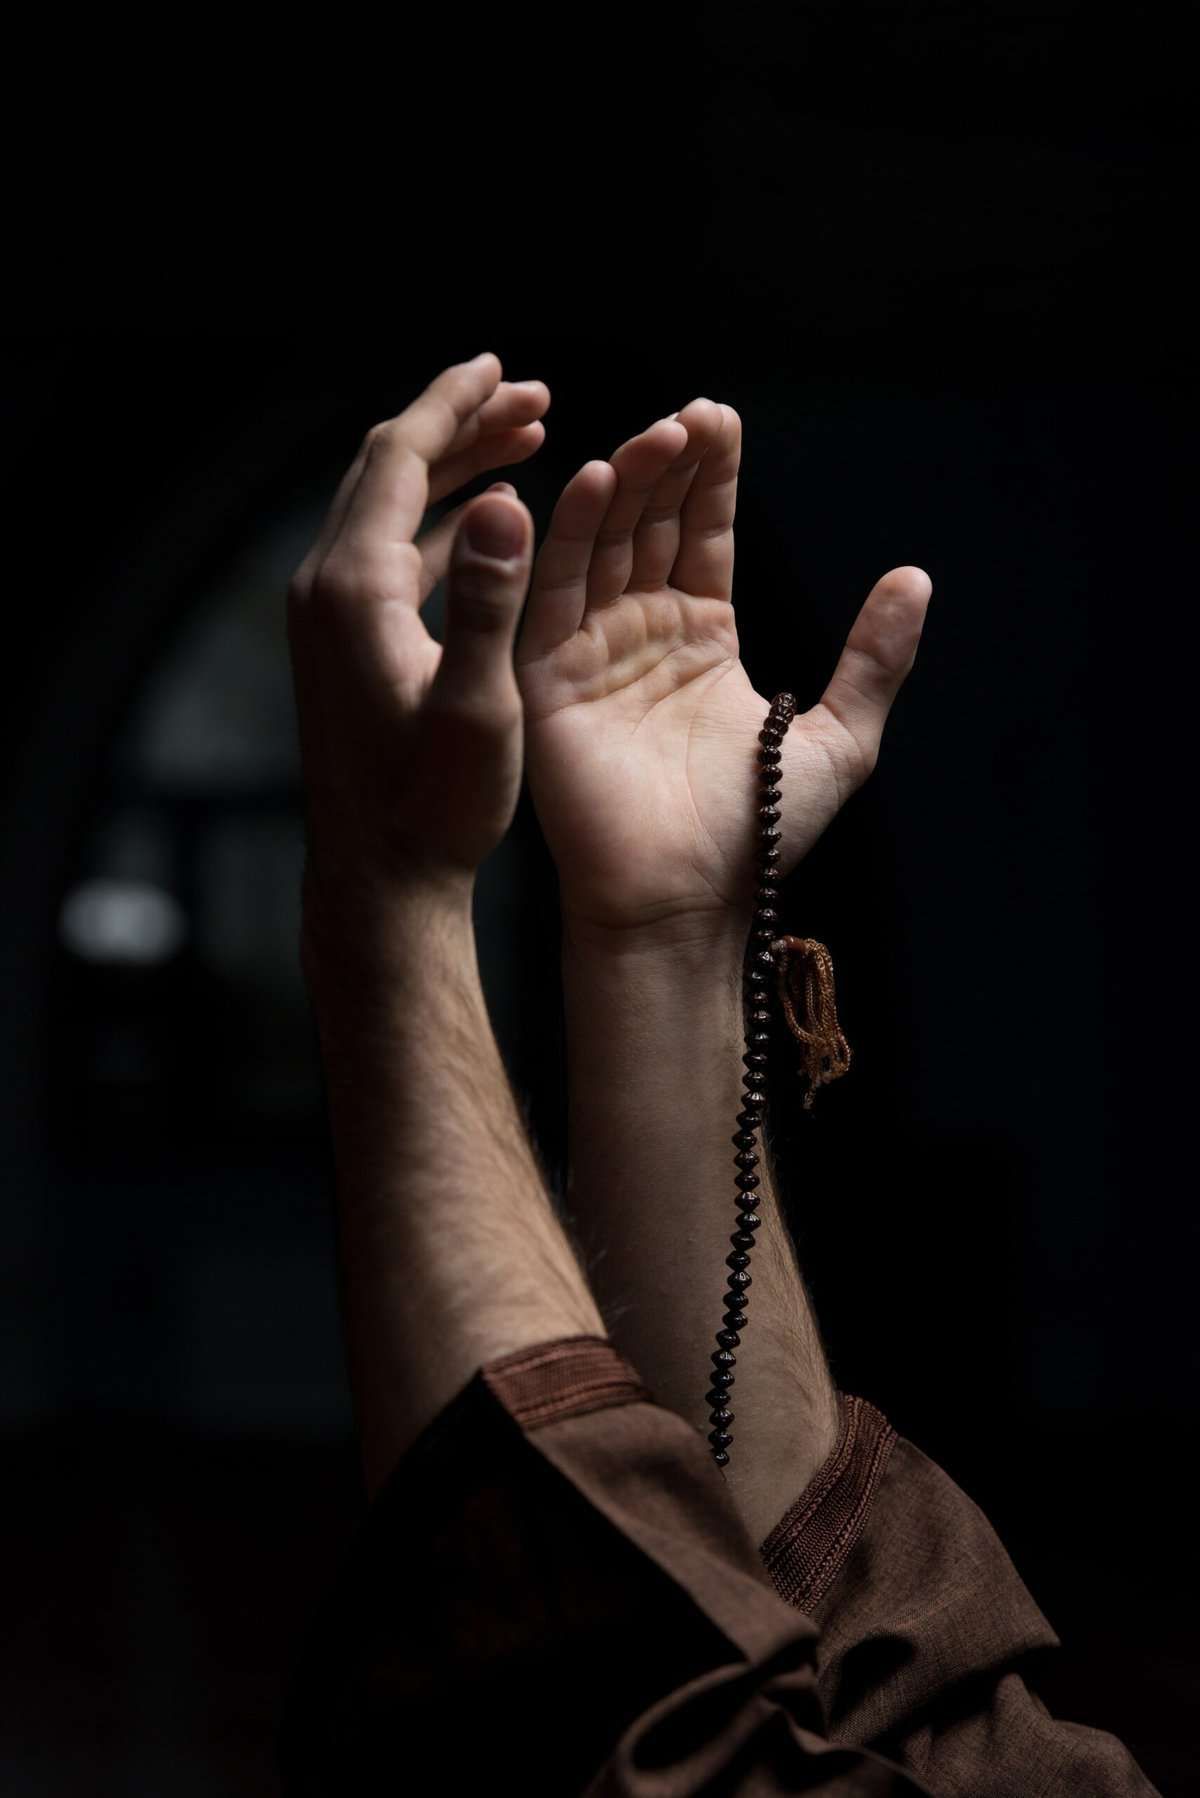 uplifted hands with rosary beads